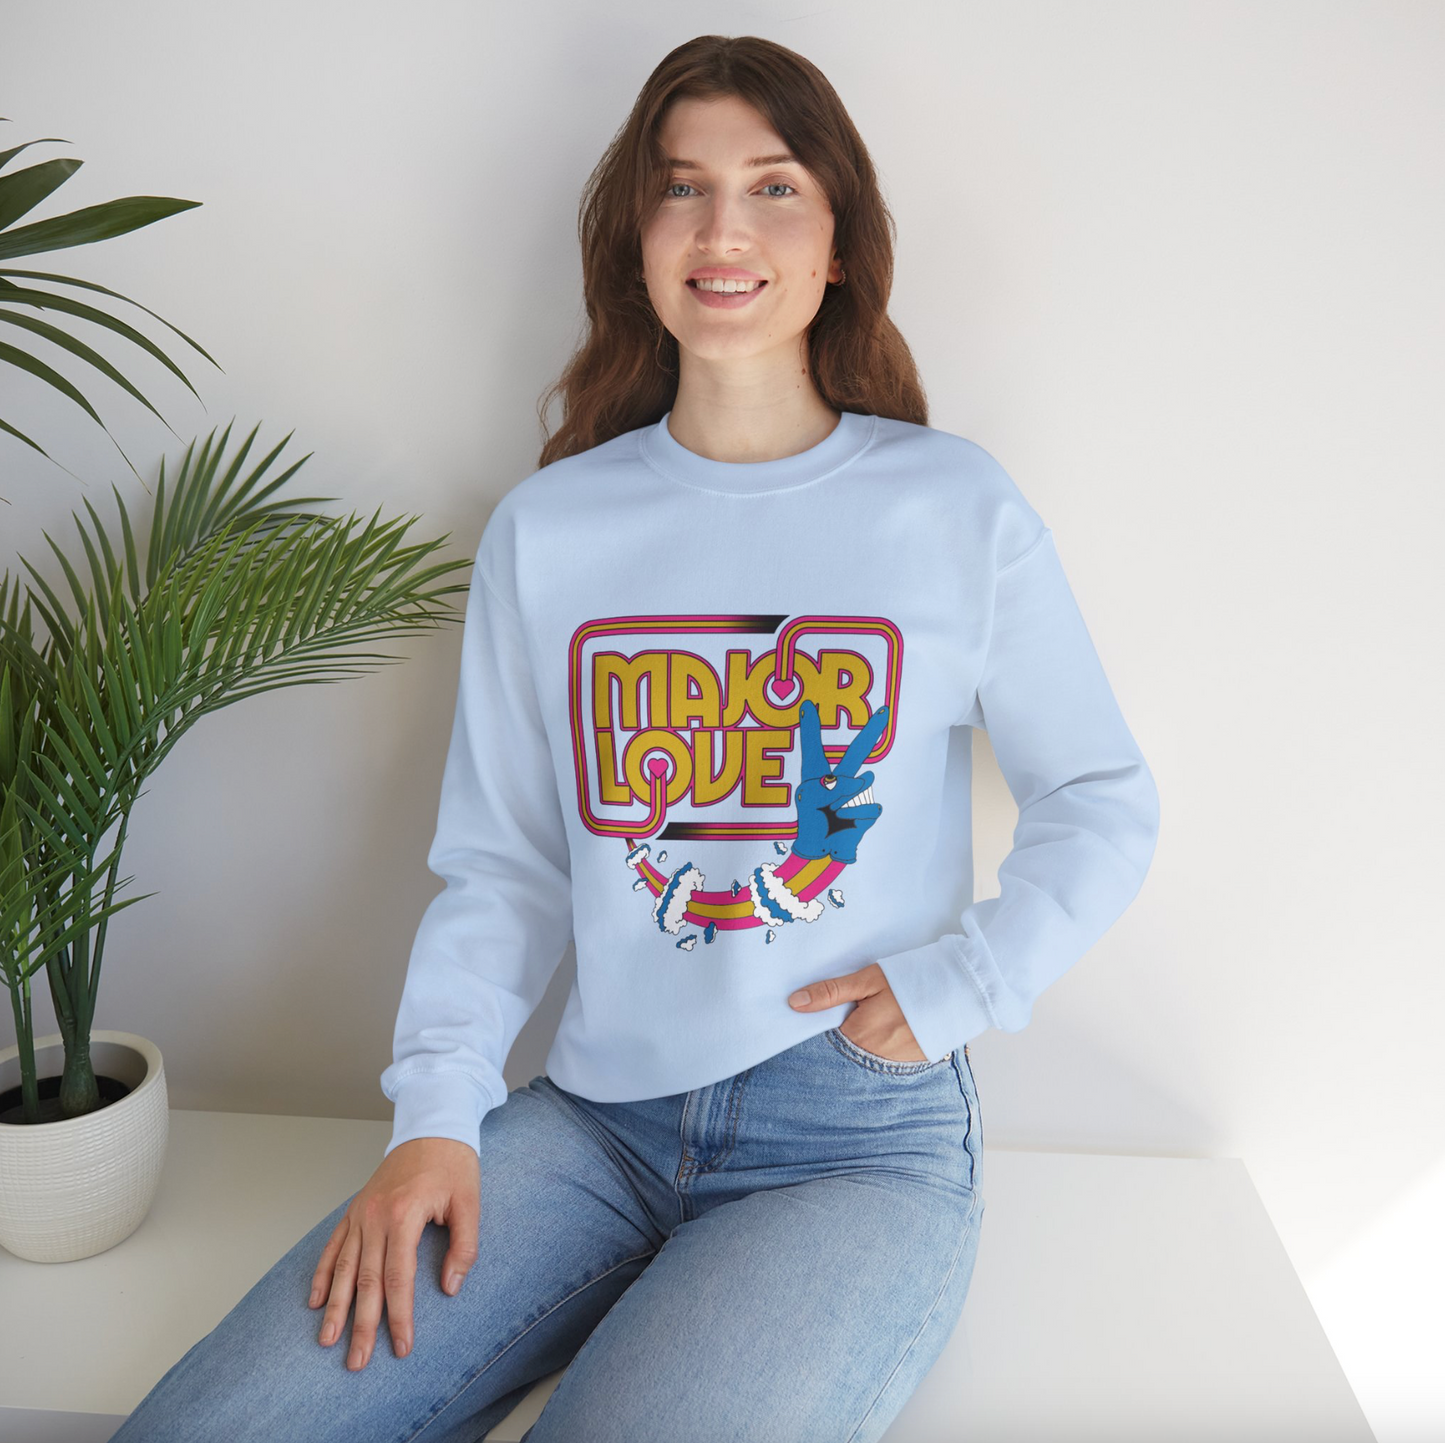 Crewneck Sweater Pack! (Crewneck Sweater + Affirmations Pack + Early Digital Download)